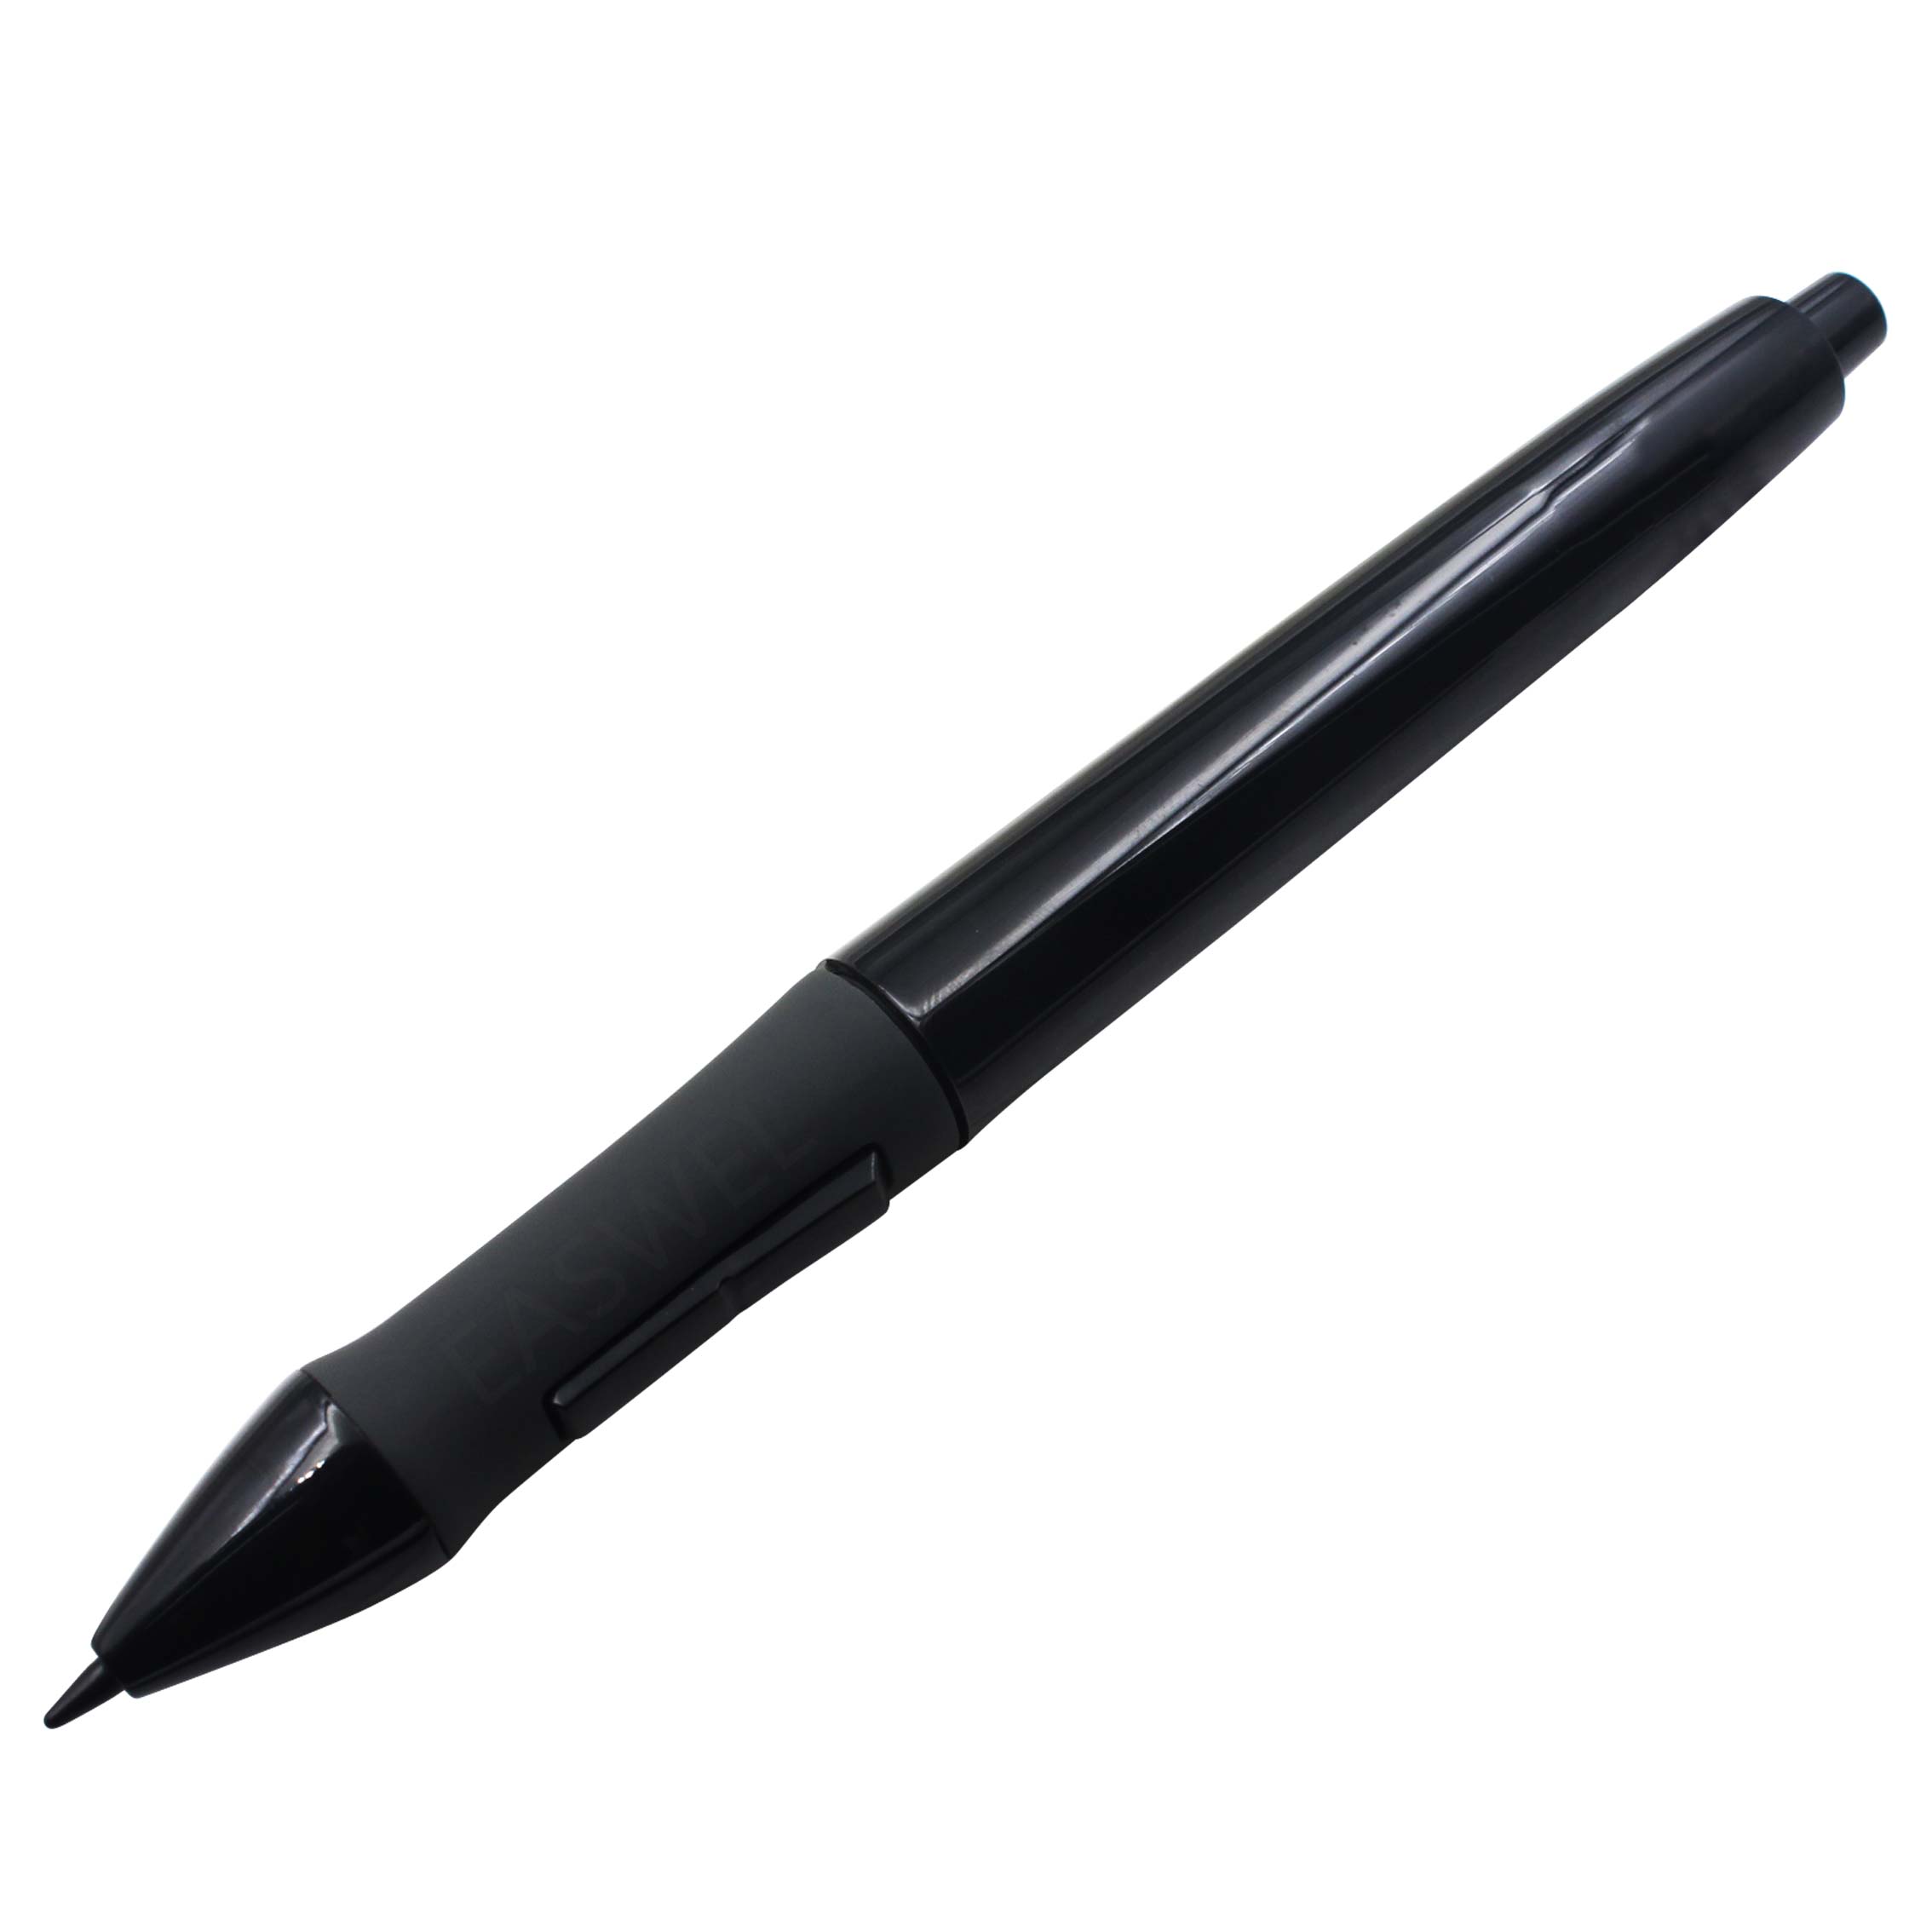 Drawing Digital Stylus Pen For Huion Graphic Tablets 680S H420 580 H610 1060 Pro